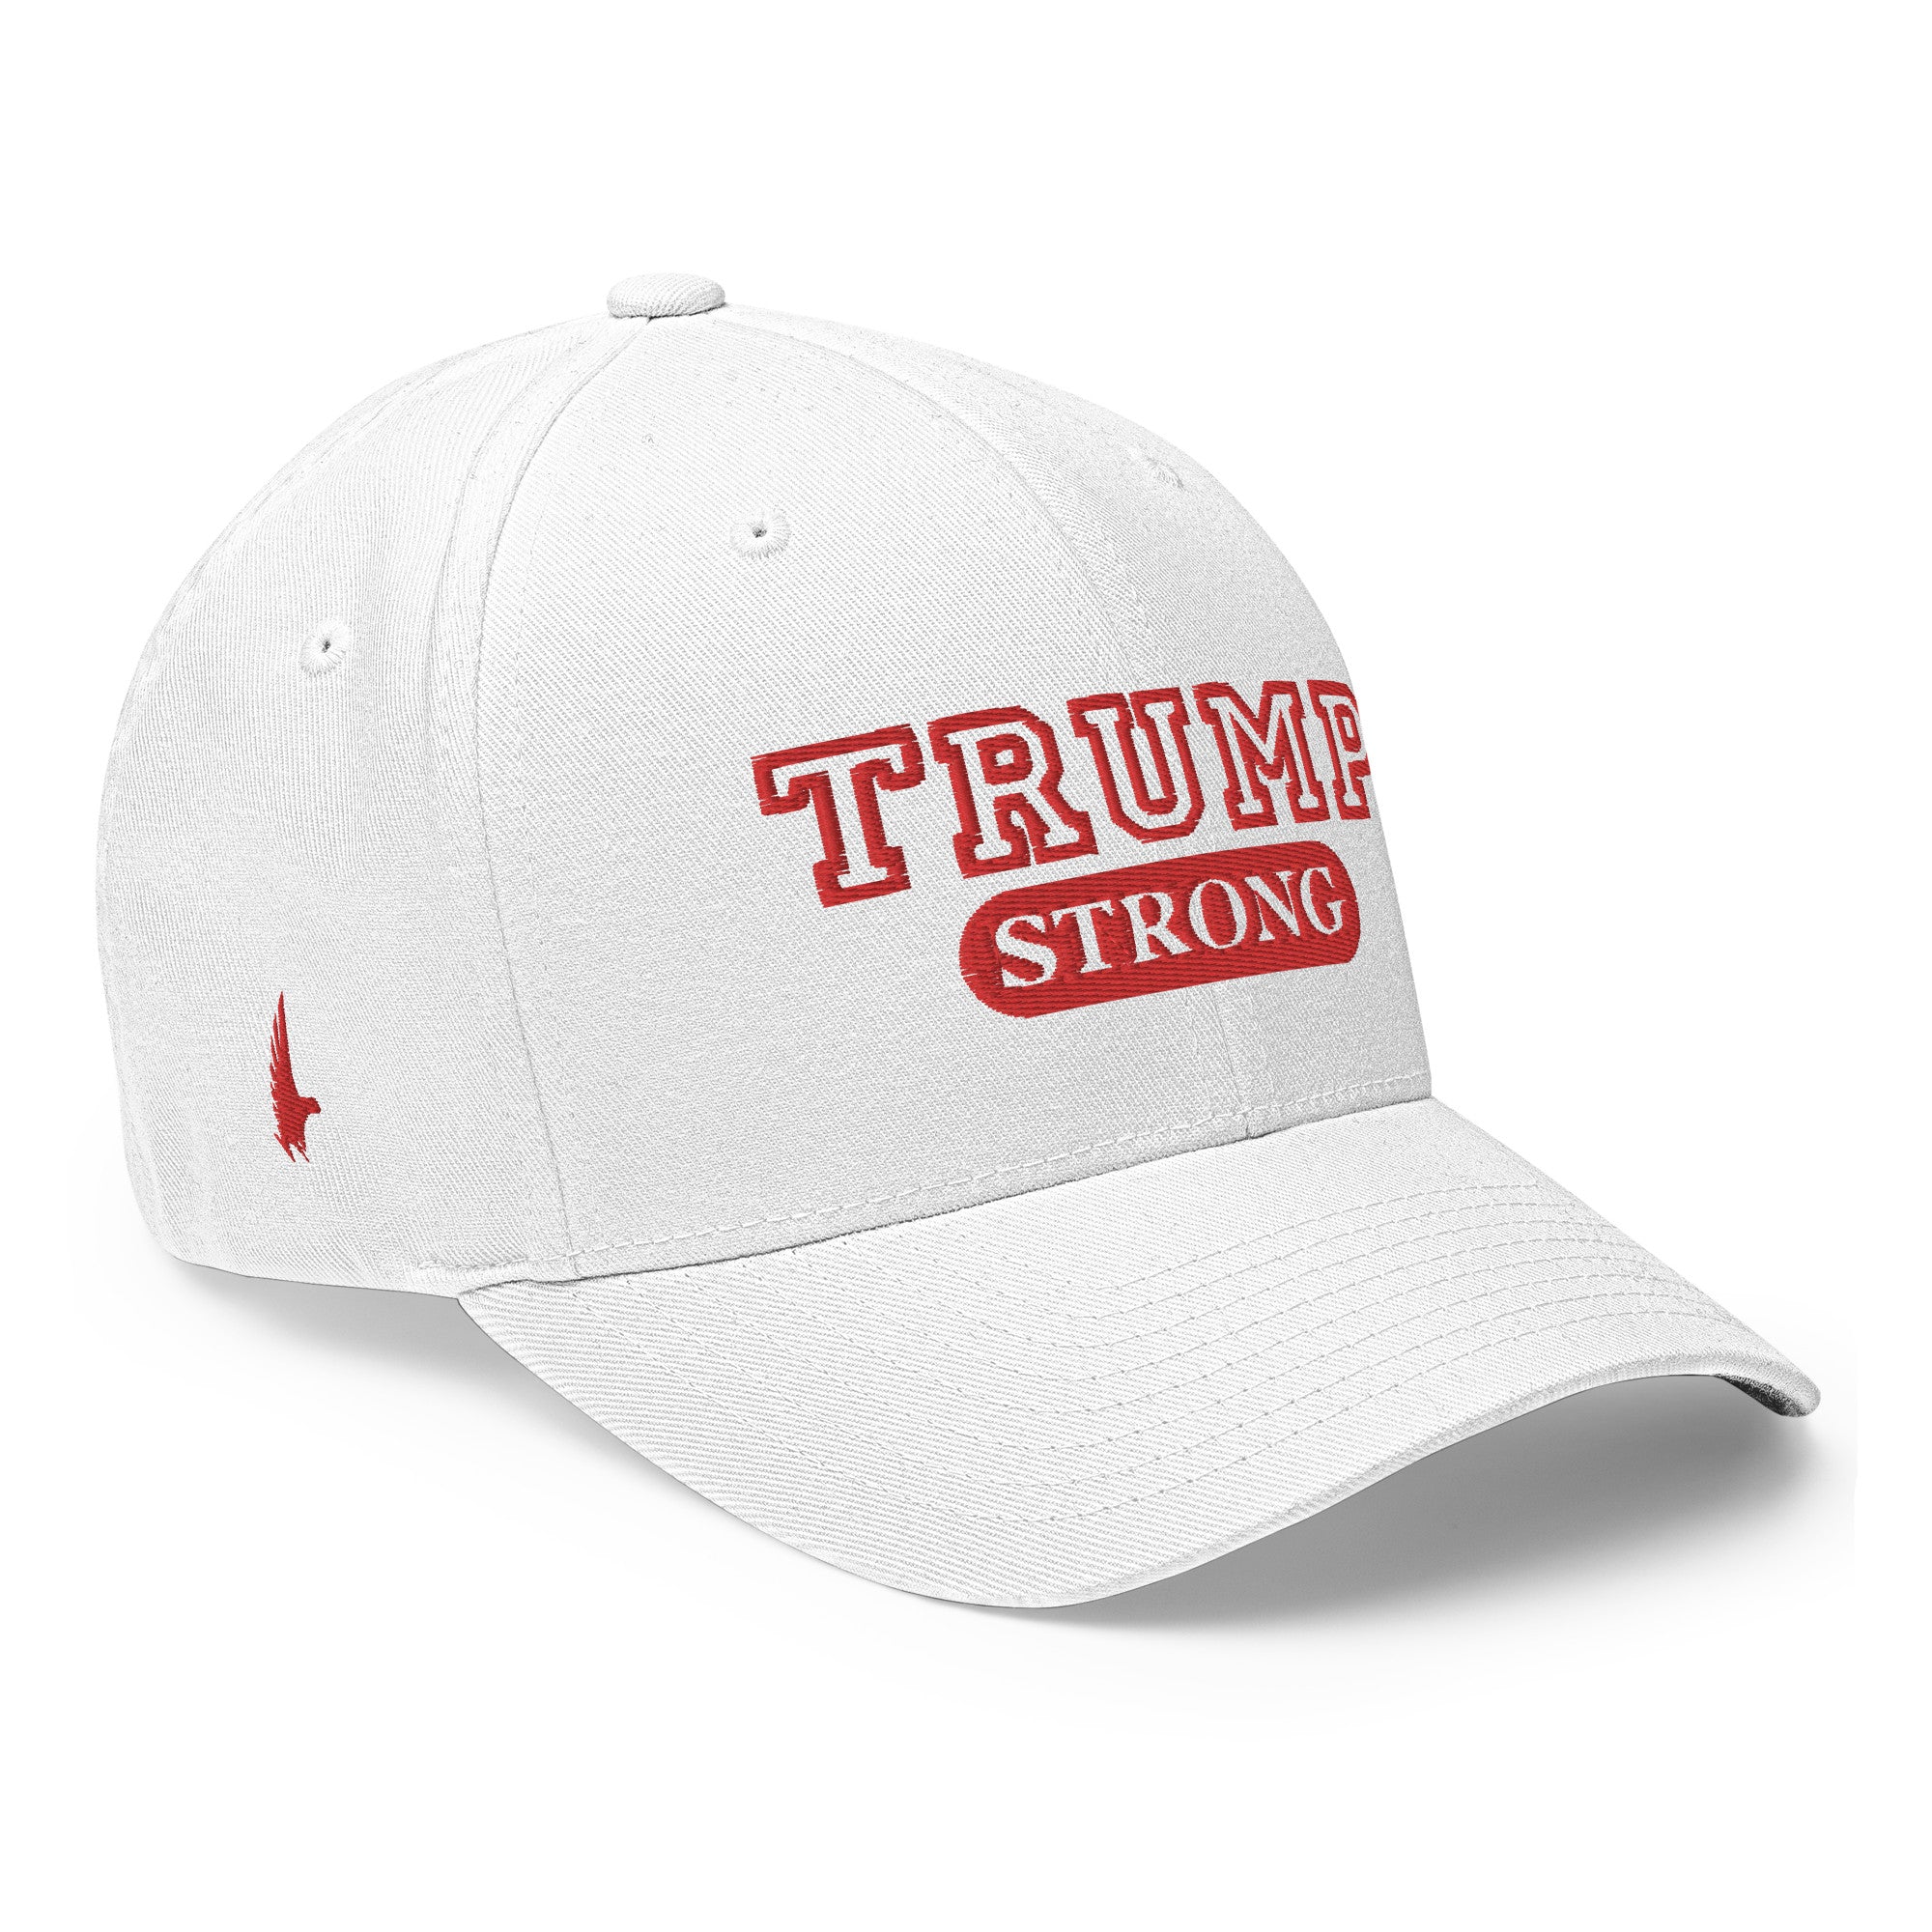 Trump Strong Fitted Hat - White/Red - Loyalty Vibes